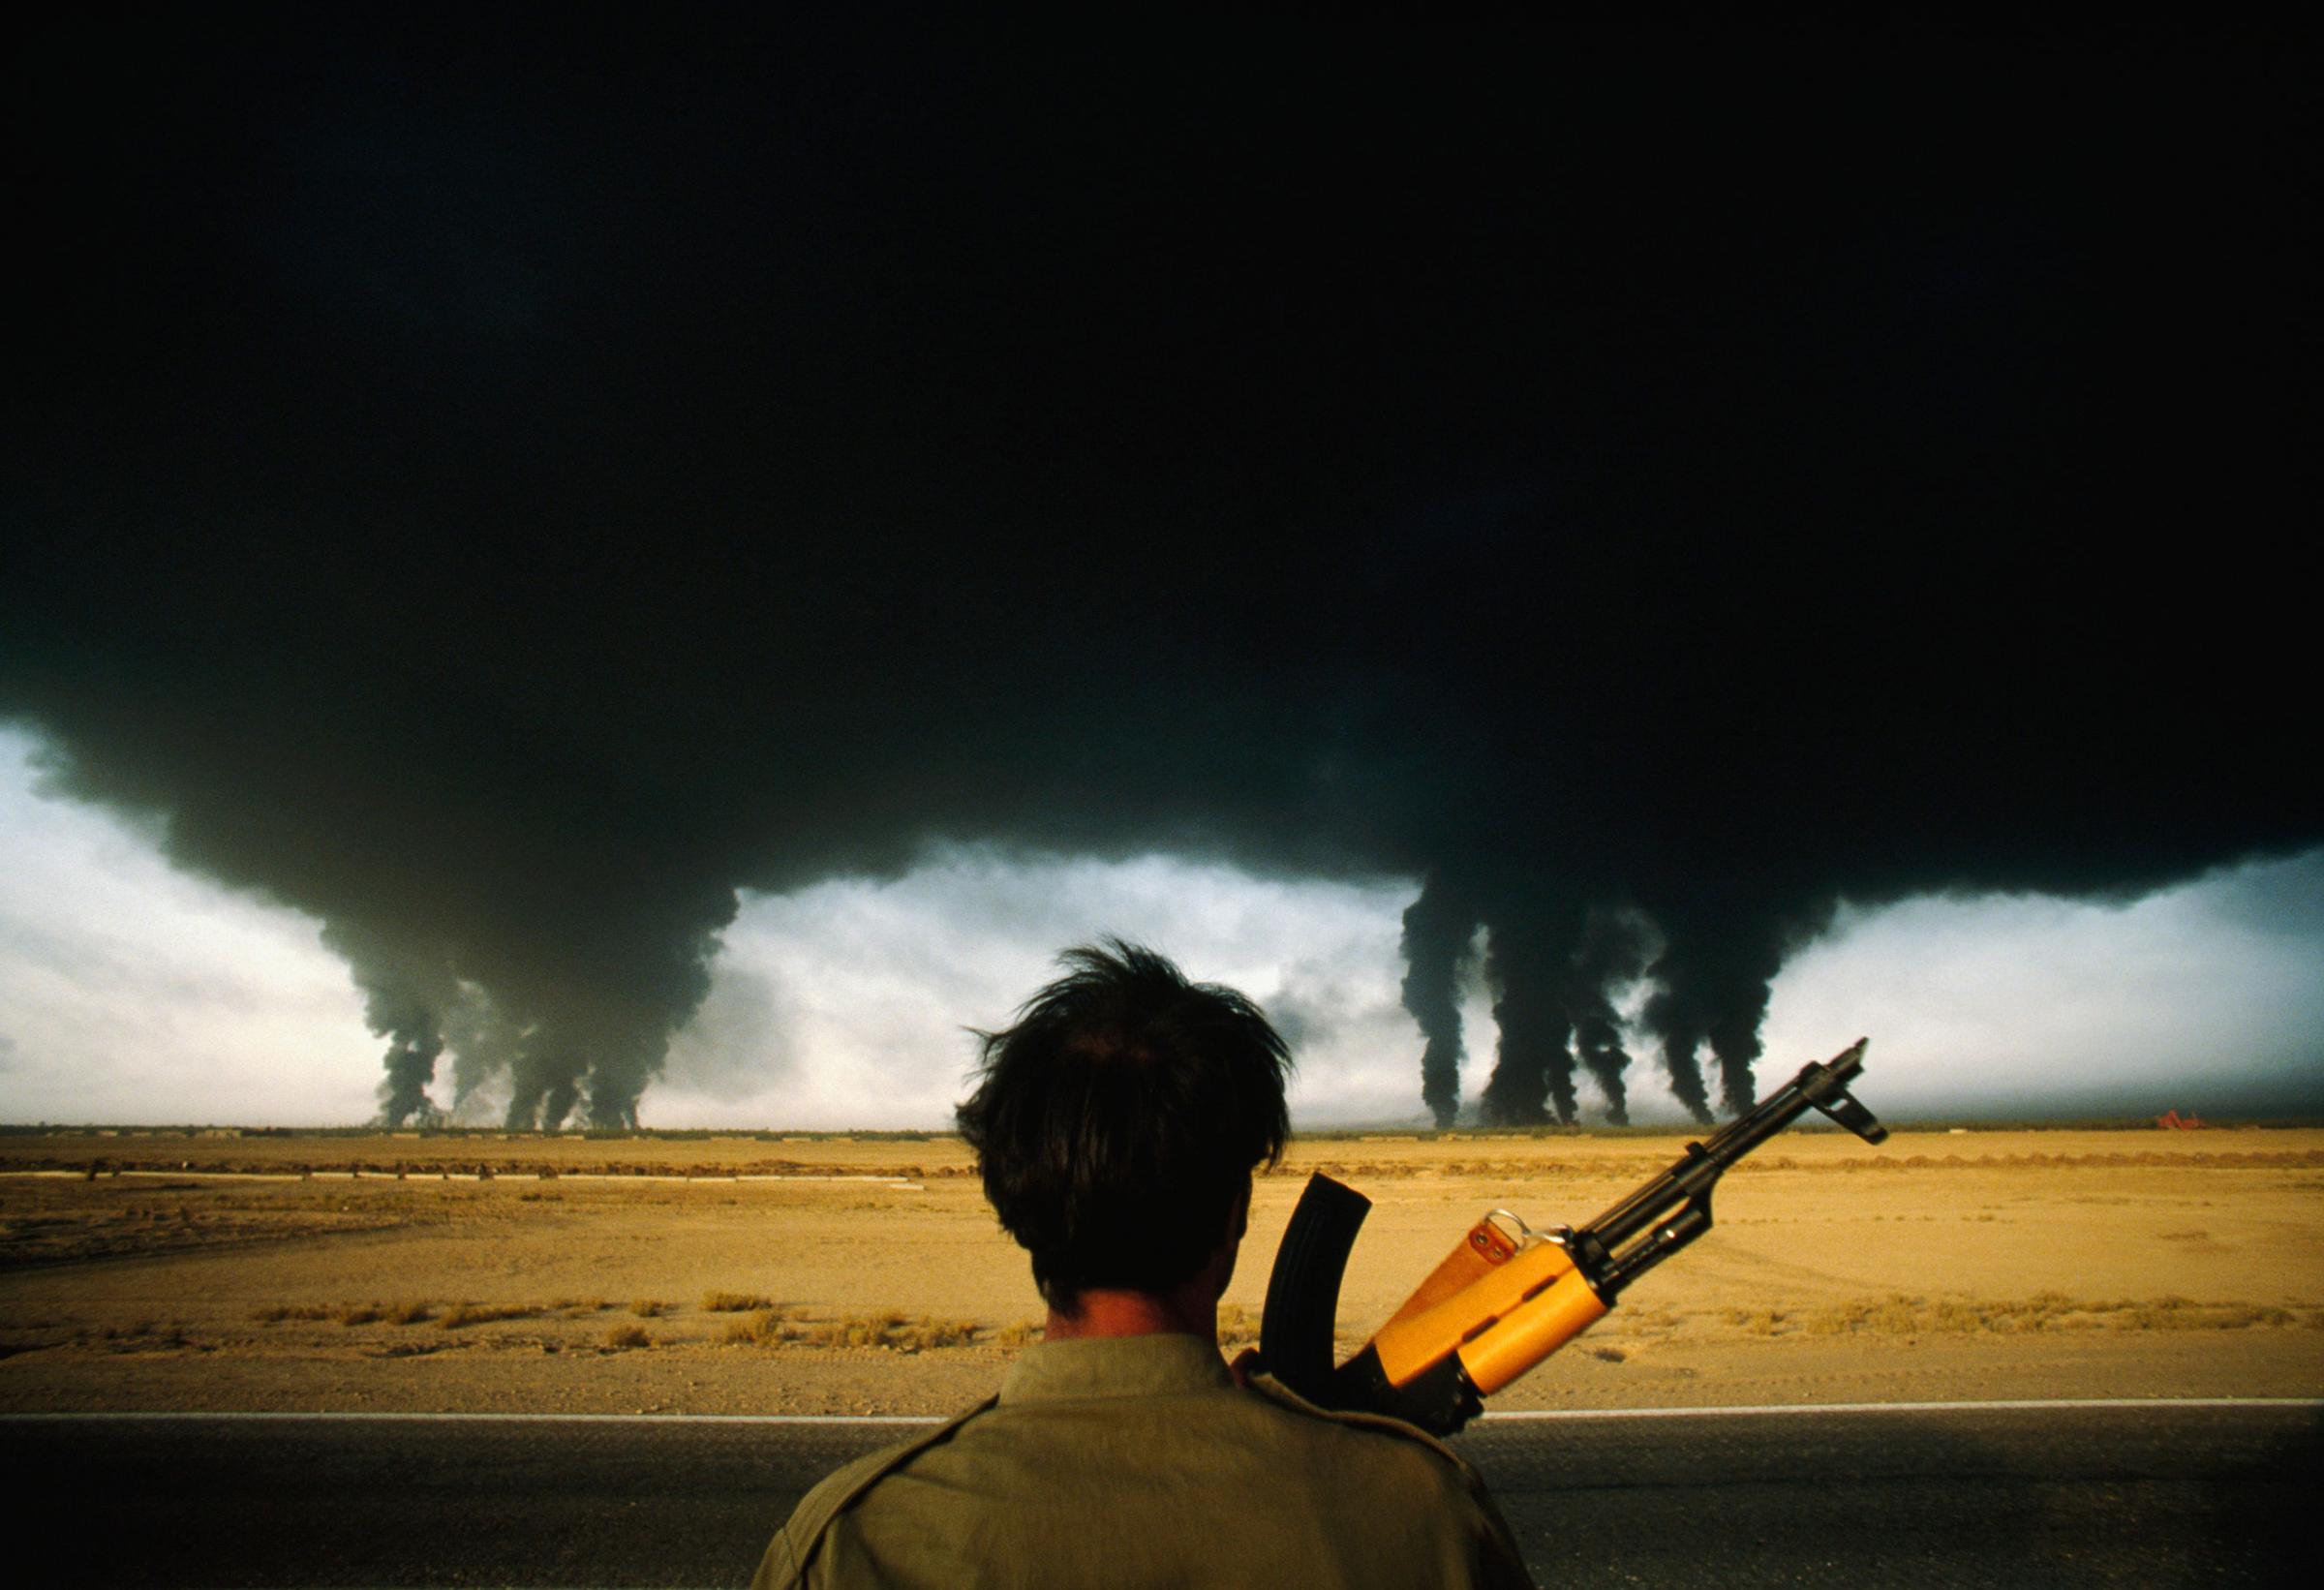 An Iranian soldier watches as smoke billows from multiple burning oil refineries in Abadan, Iran on Sept. 27, 1980.